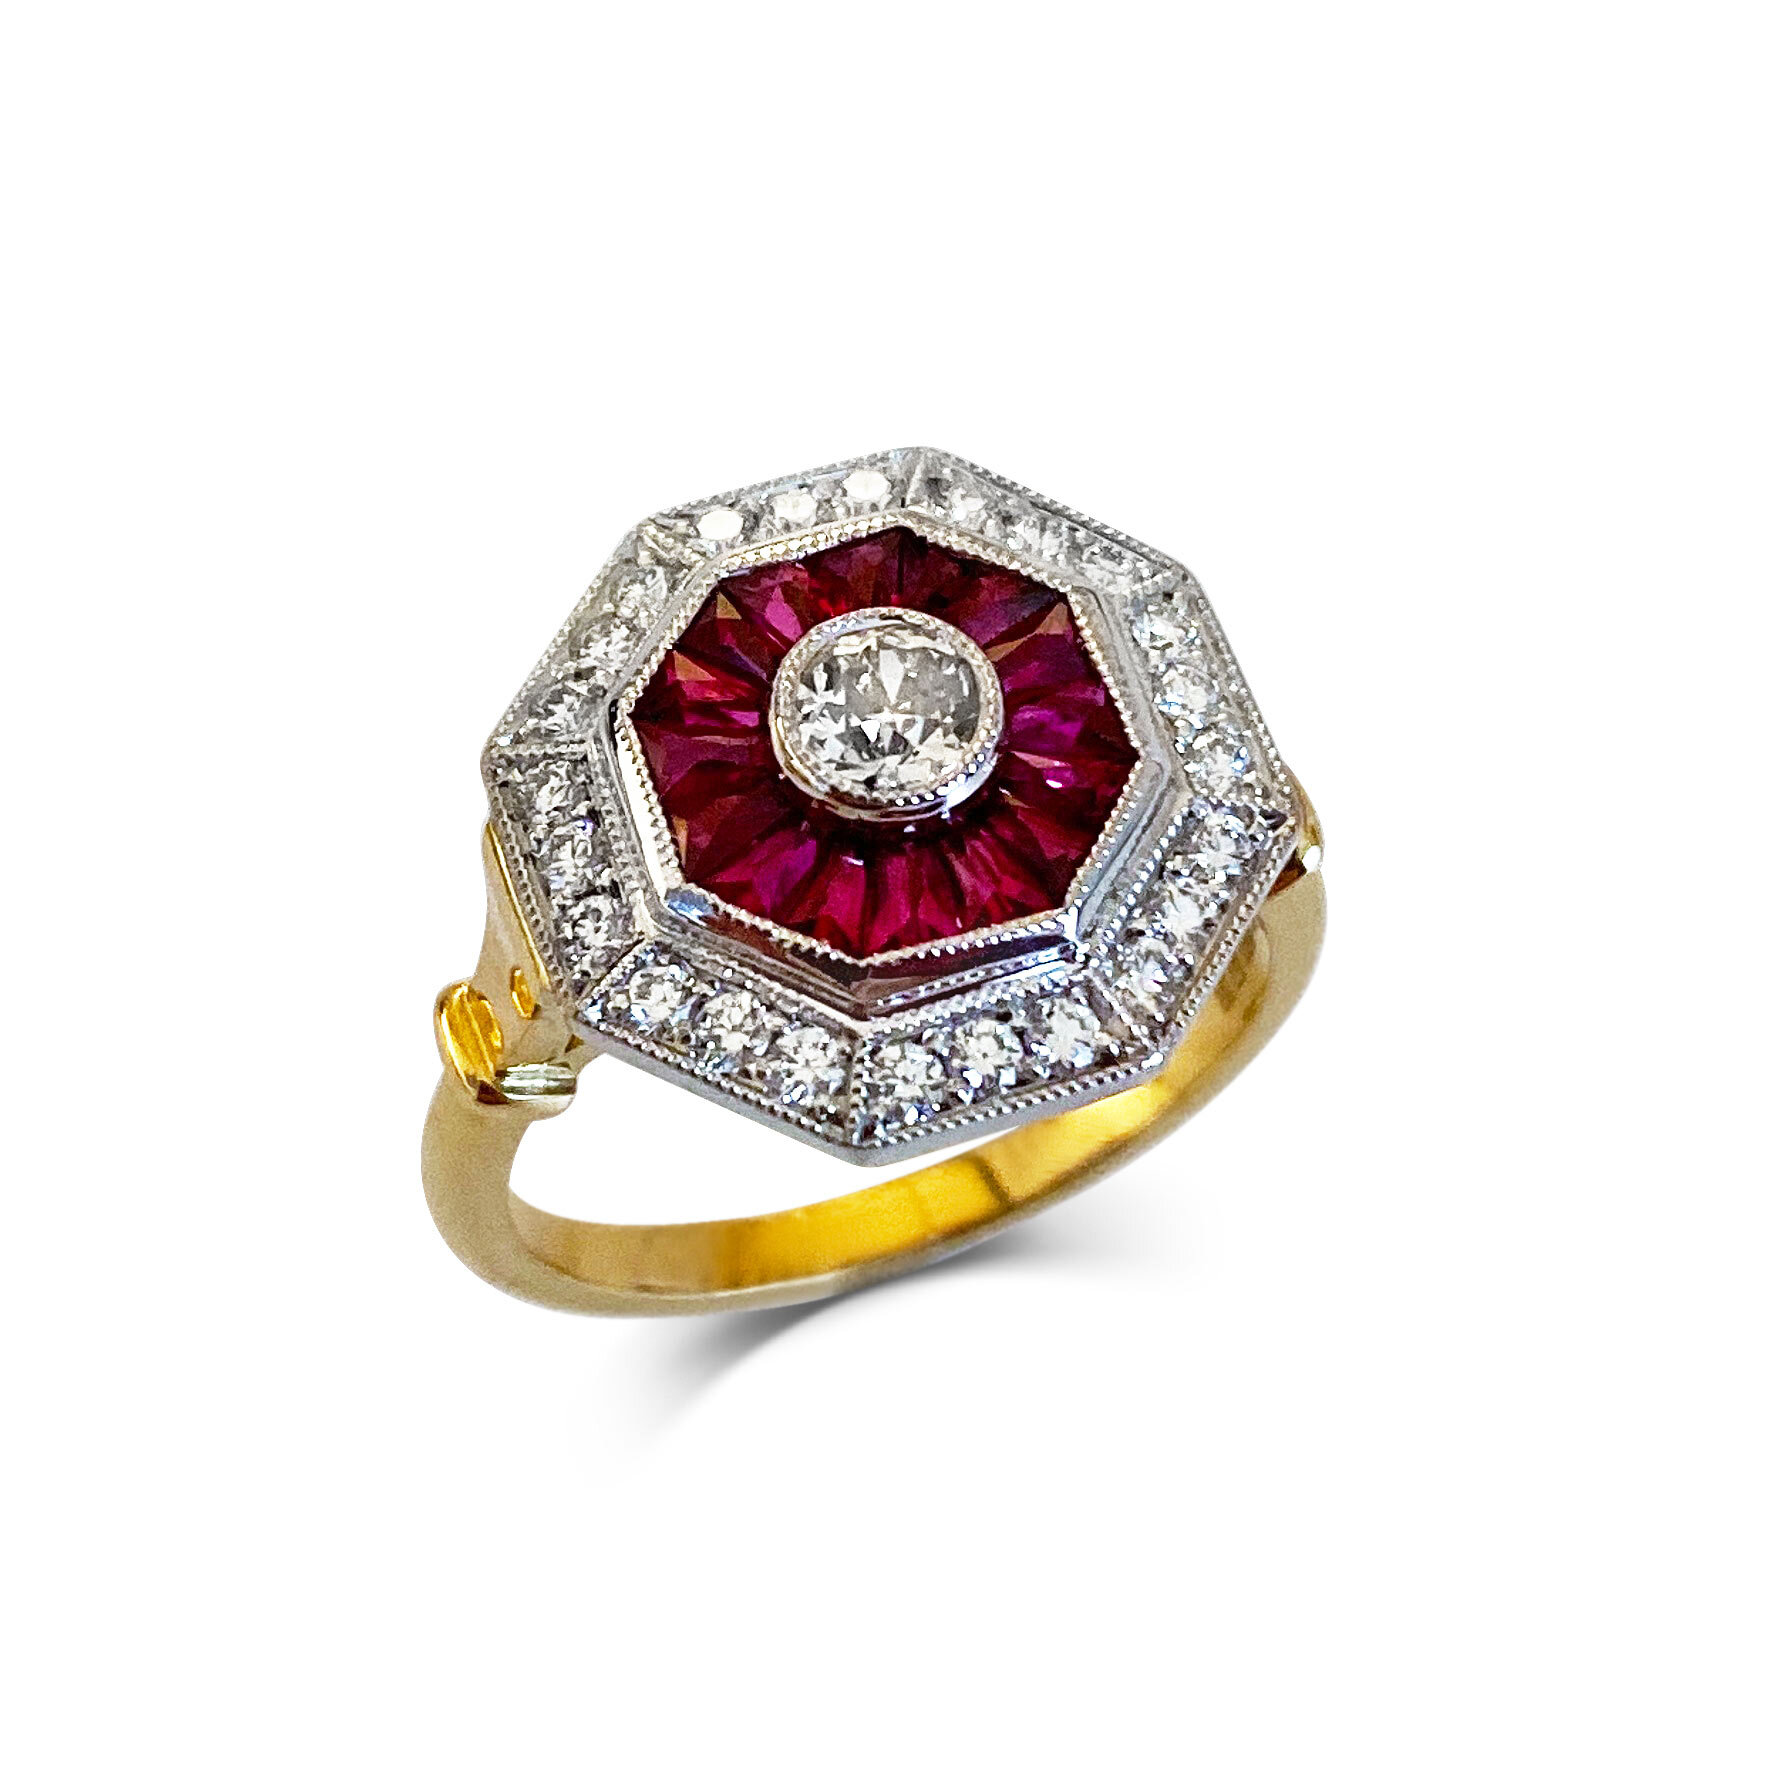 Diamond-and-french-cut-ruby-target-ring-mounted-in-18ct-yellow-gold-and-18ct-white-gold.jpg